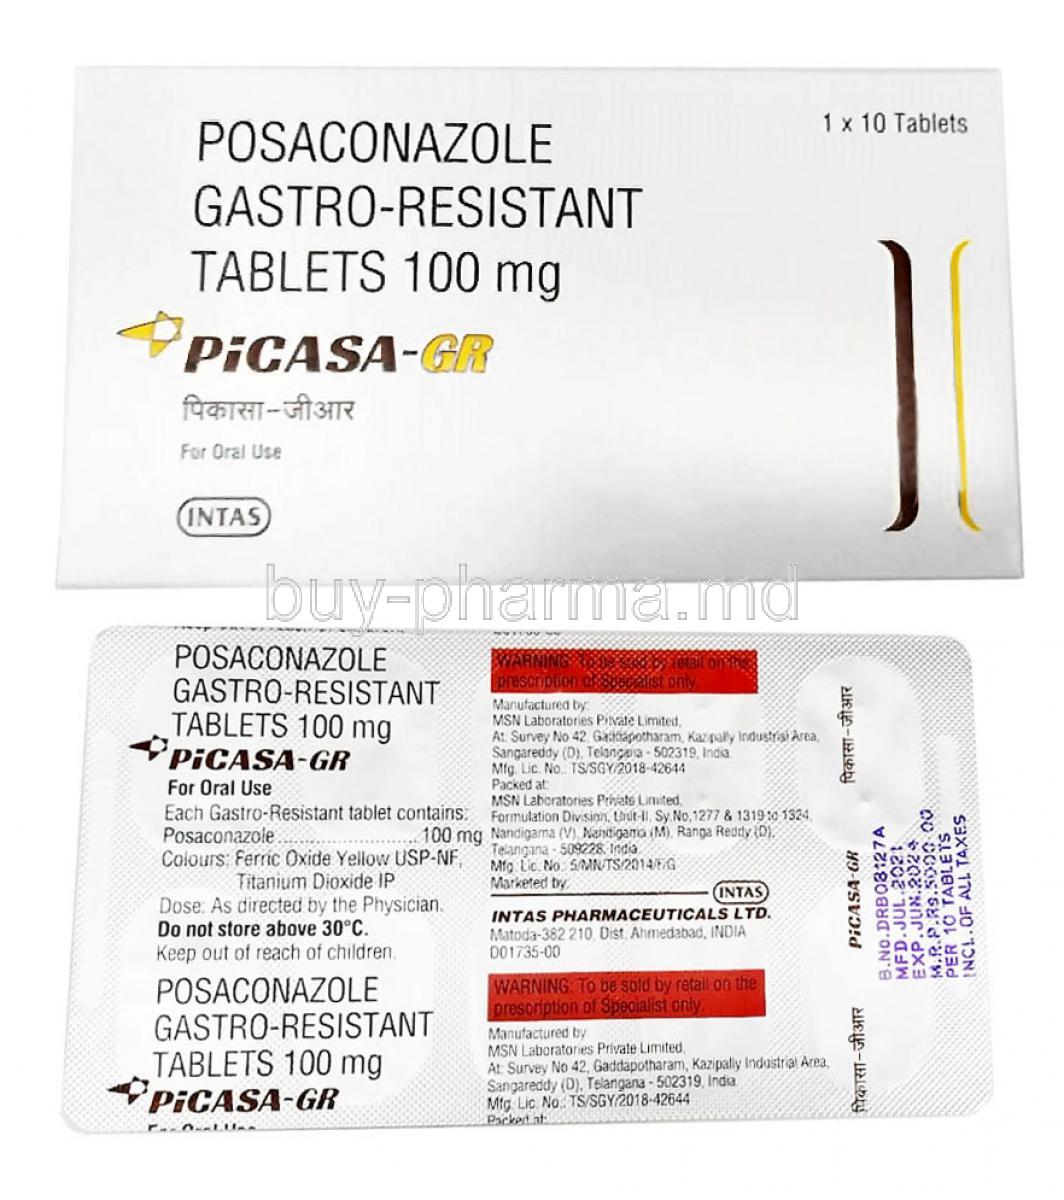 Picasa GR, Posaconazole100mg,Tablet, Intas Pharmaceuticals Ltd, Box front view, Blisterpack information